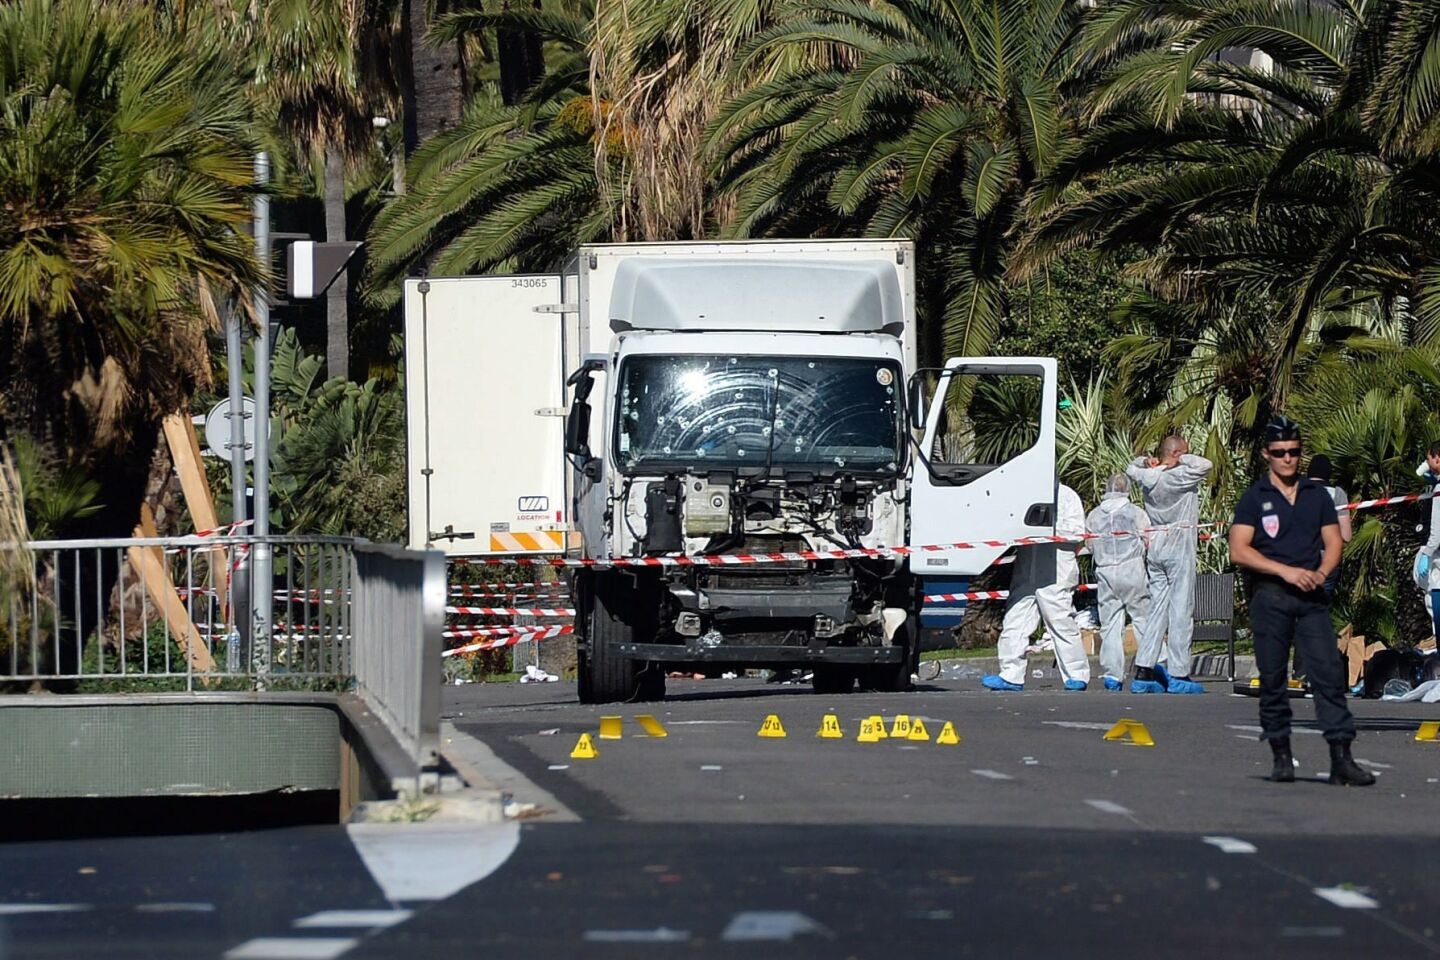 Police secure the area where a truck drove into a crowd during Bastille Day celebrations, killing scores of people in Nice, France.